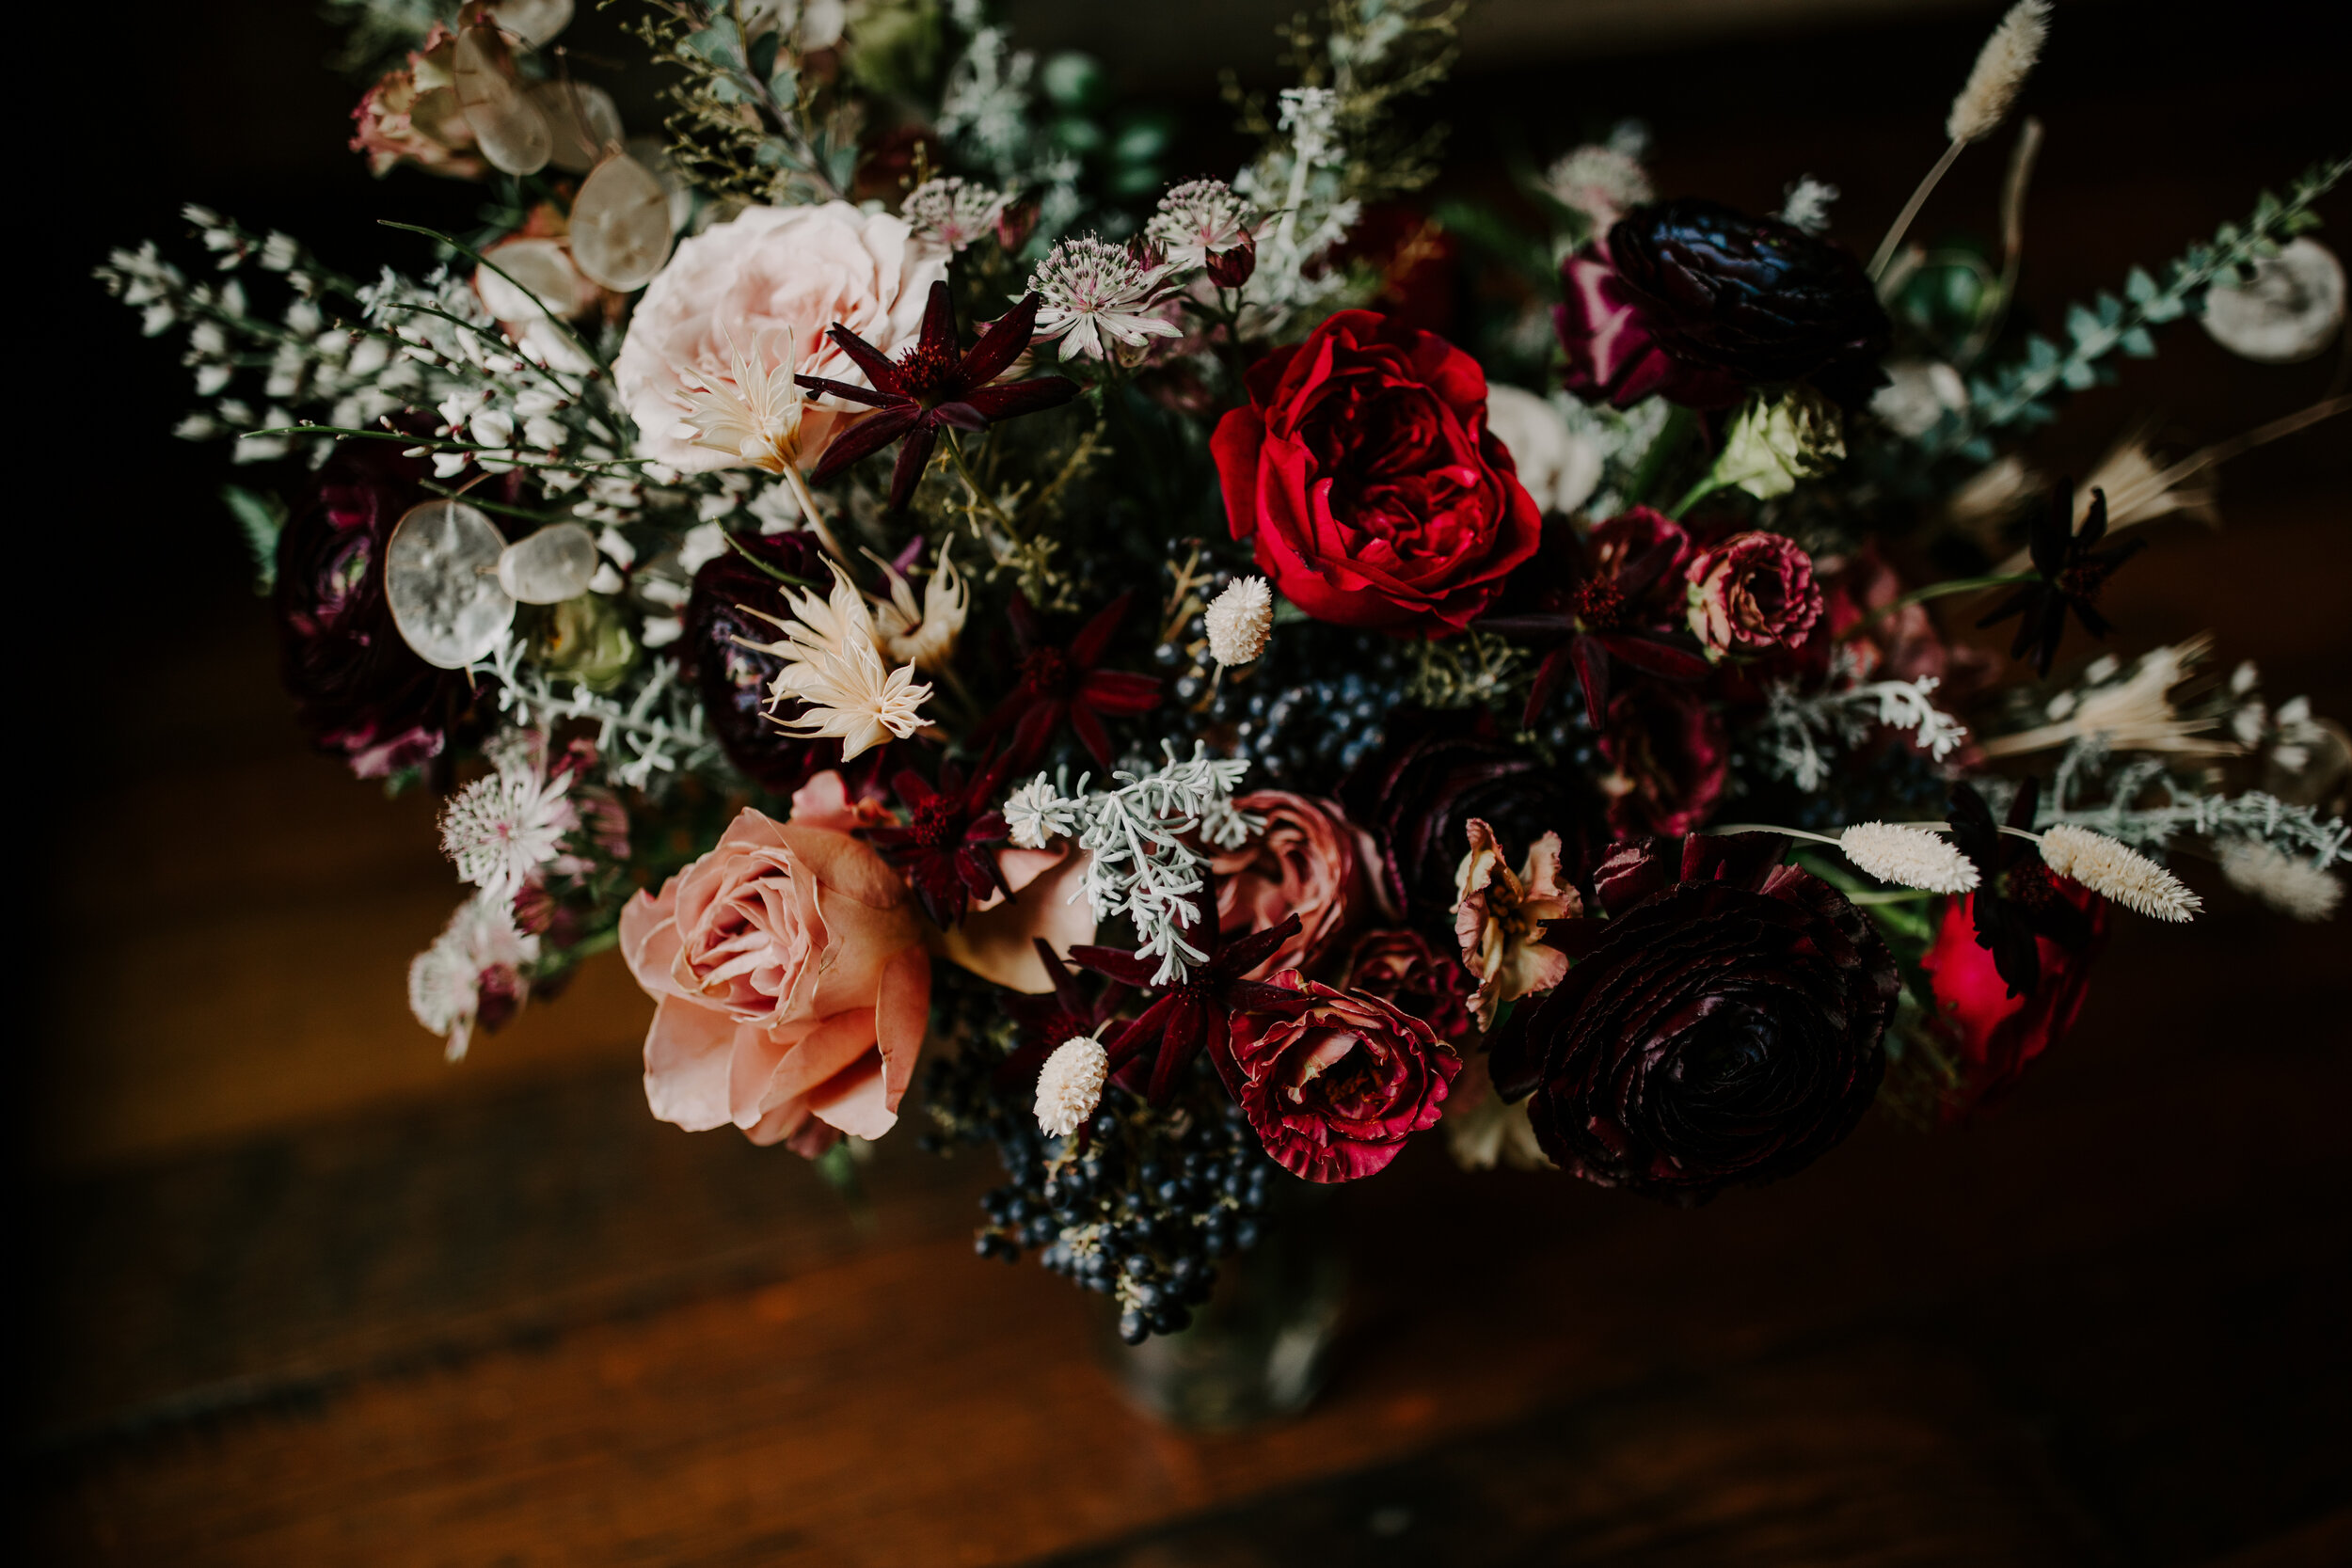 Loose, whimsical winter bridal bouquet with eggplant, blush, mauve, and burgundy garden roses and ranunculus, dried flowers, and natural, untamed greenery. Nashville wedding floral design at the Cordelle.